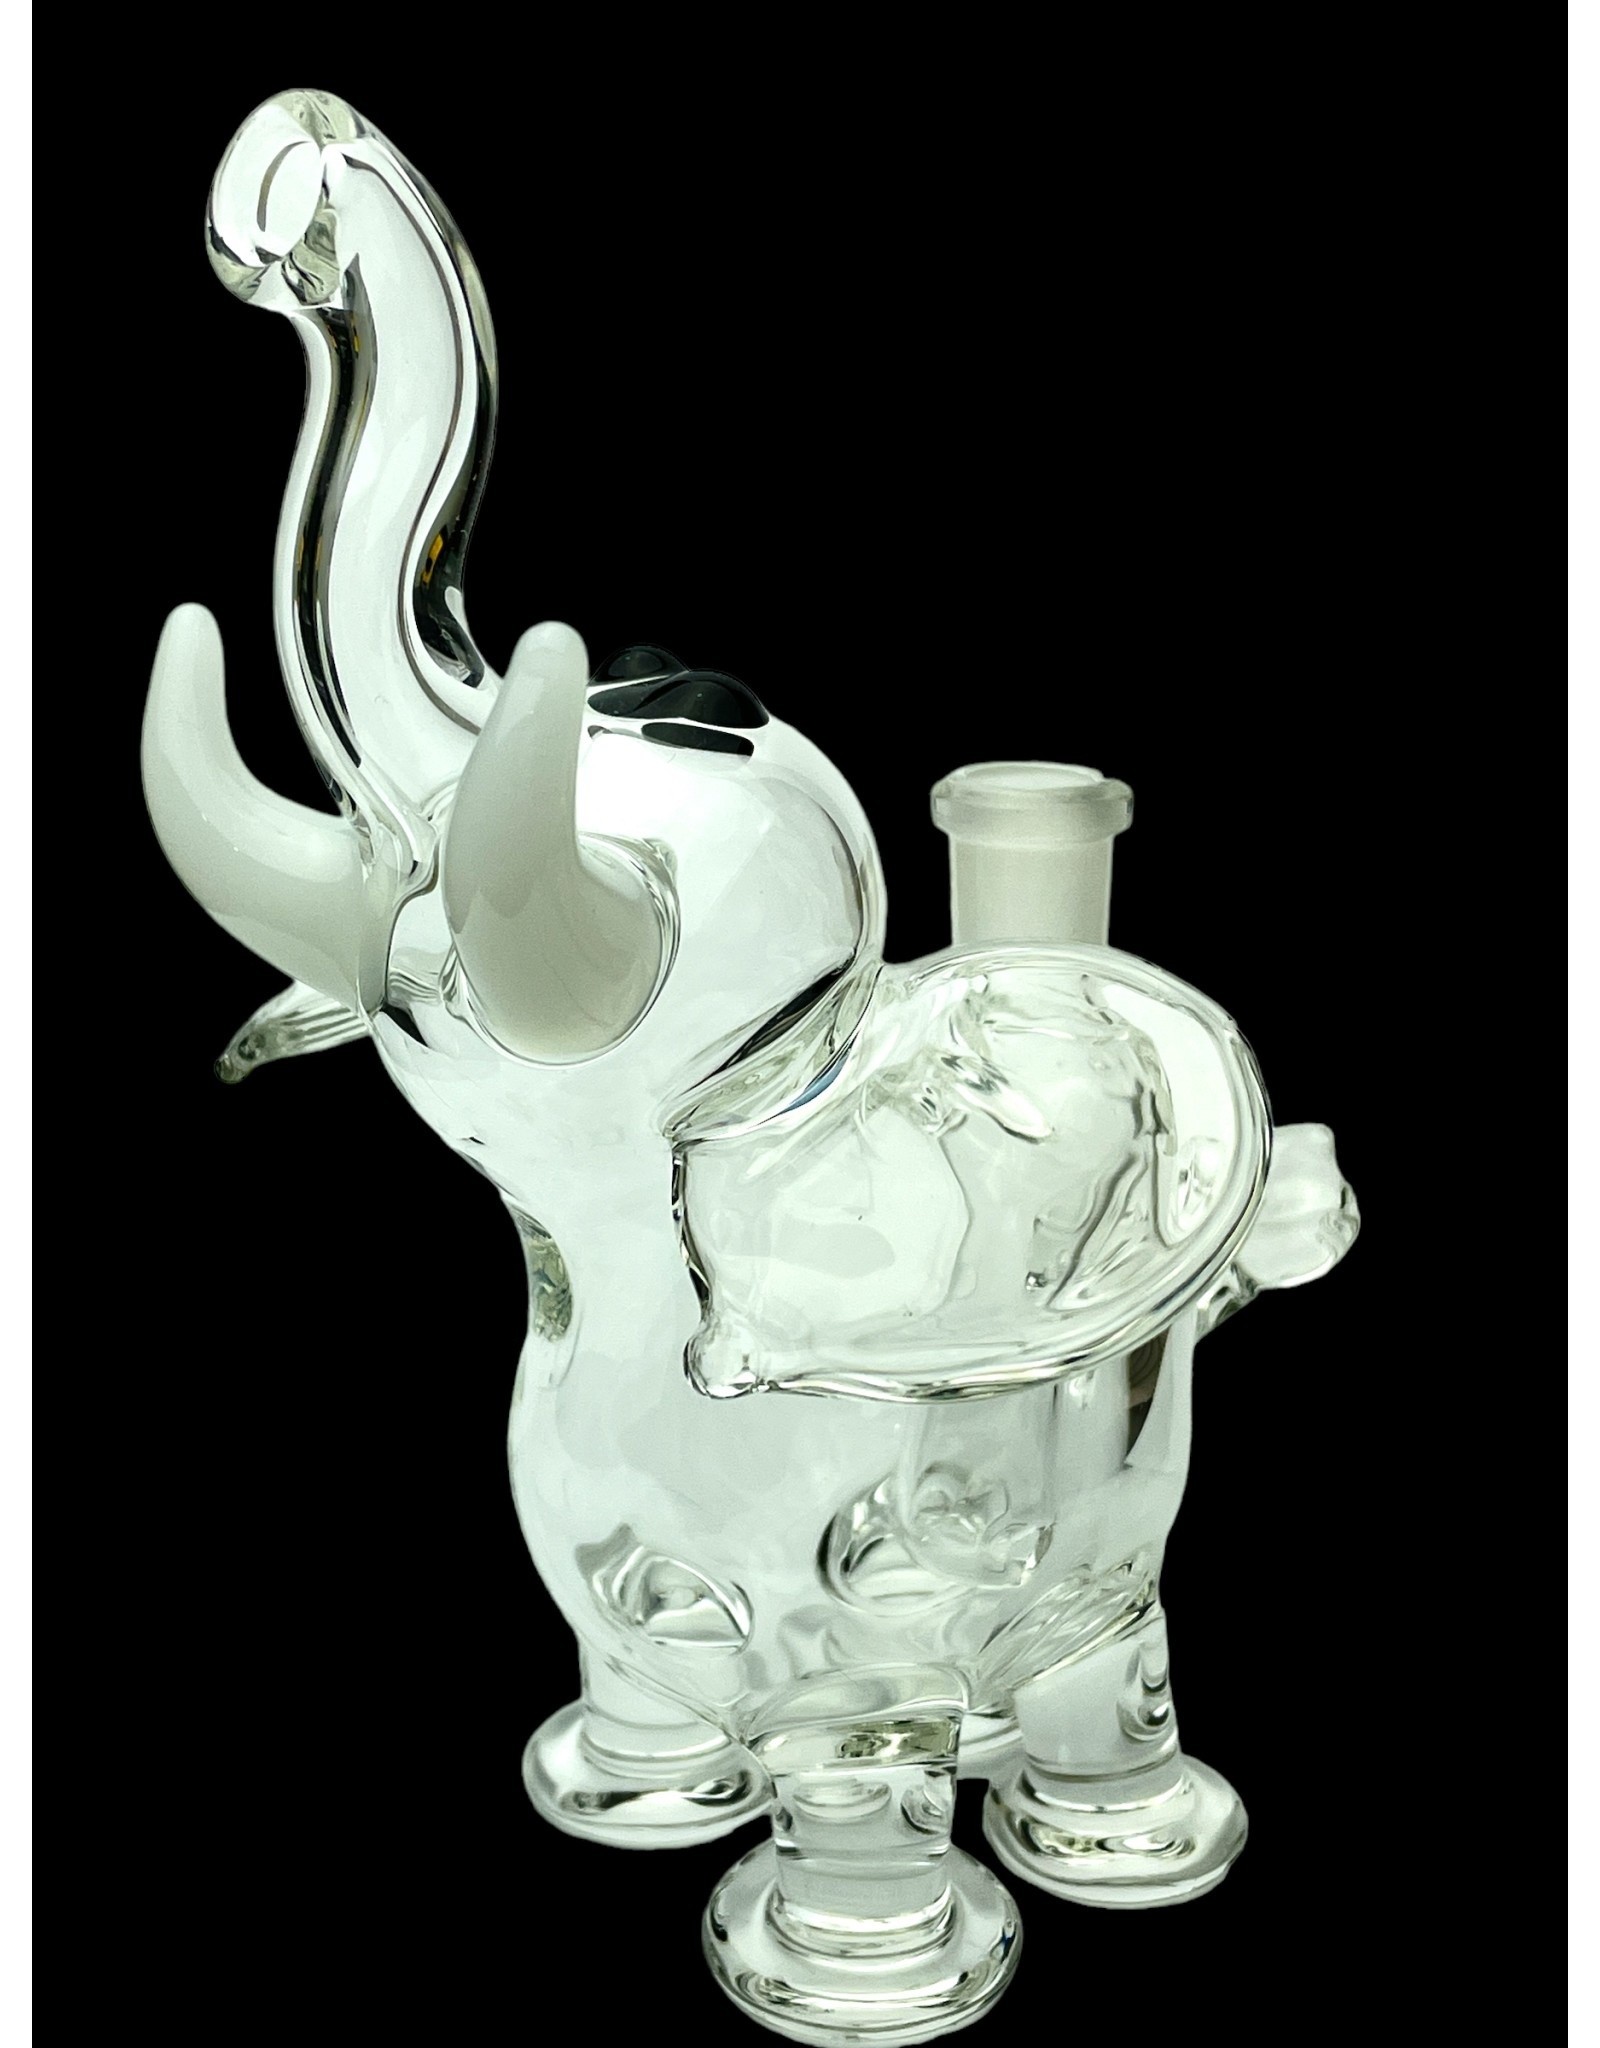 Micro Clear Elephant With White Tusks